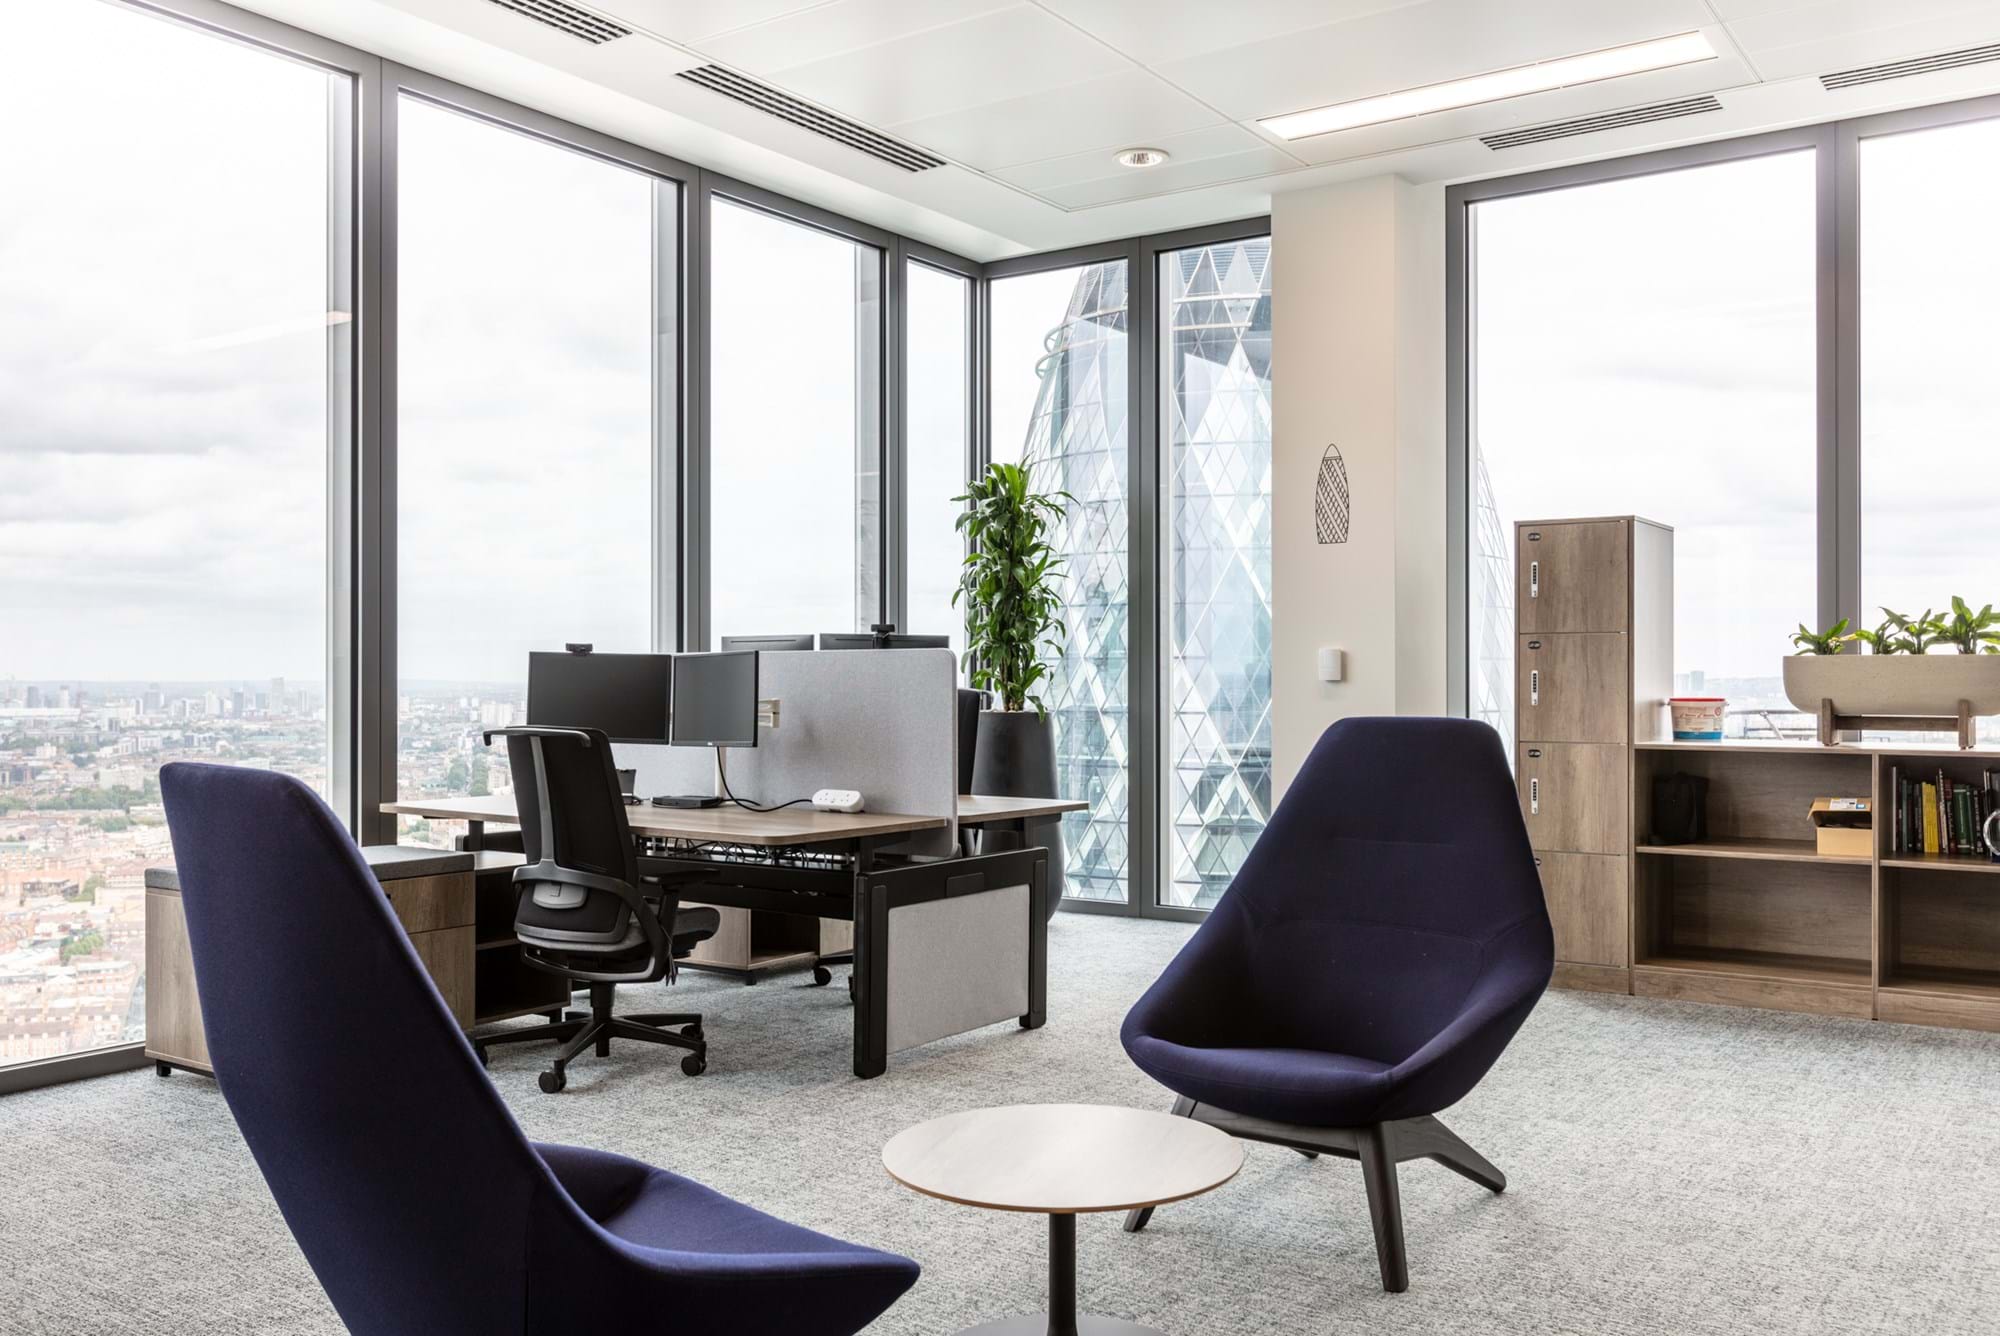 Modus Workspace office design, fit out and refurbishment - Insurance and Risk Management Firm - Modus_Verisk_Day2-14.jpg